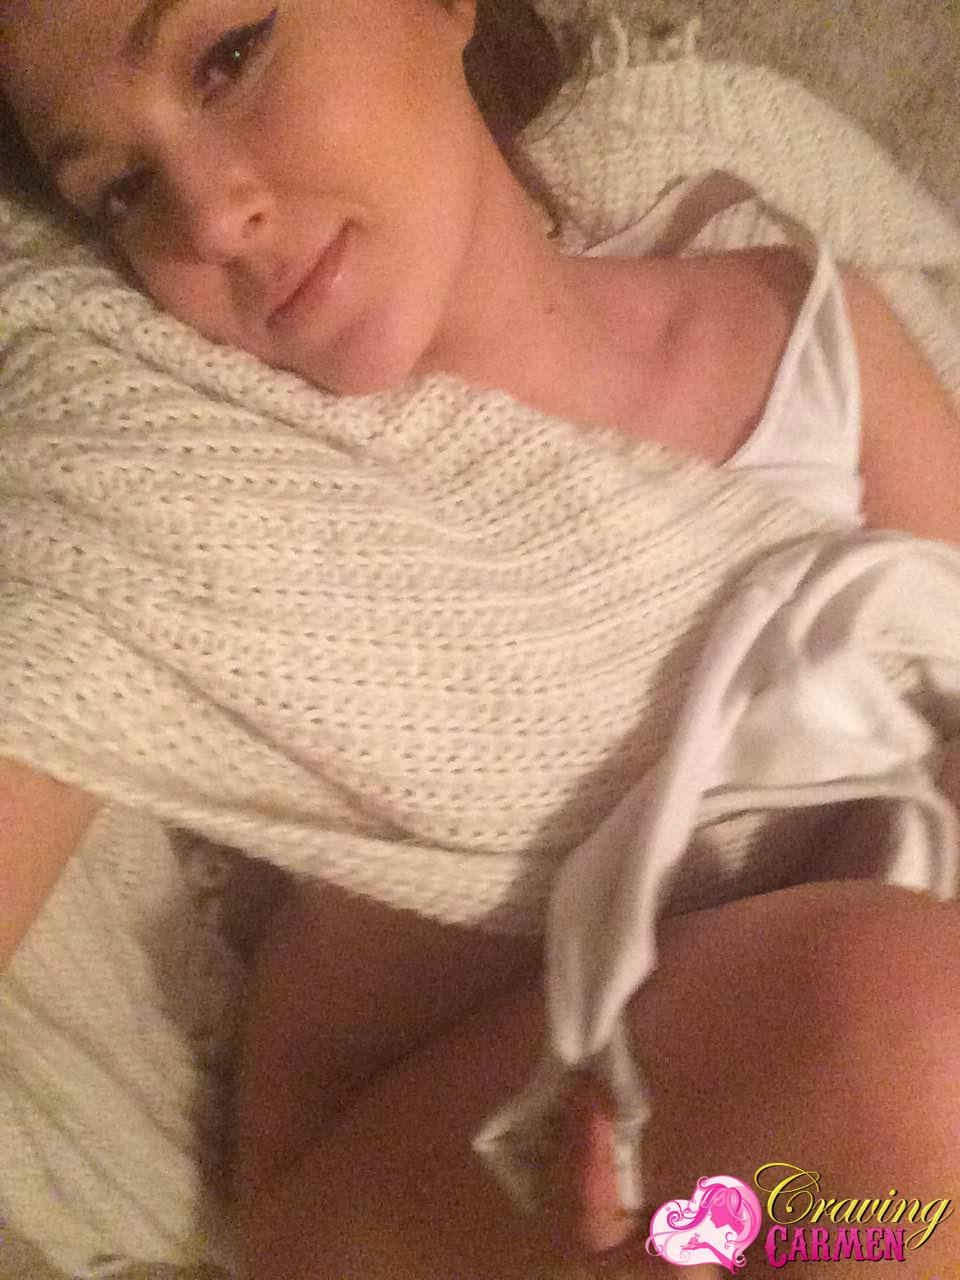 Craving Carmen gets naked and takes selfies in bed #53874527